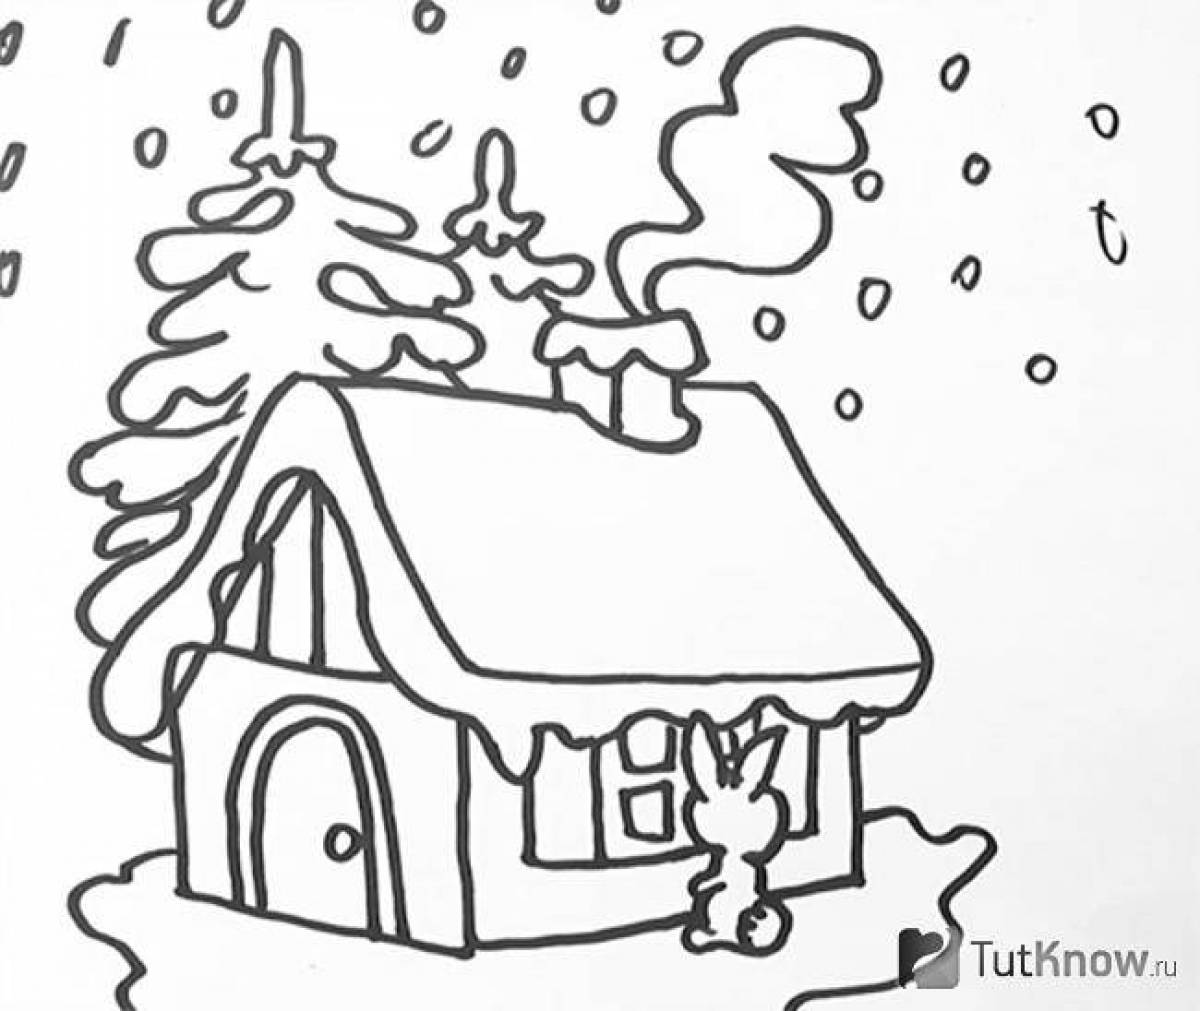 Coloring page playful winter house